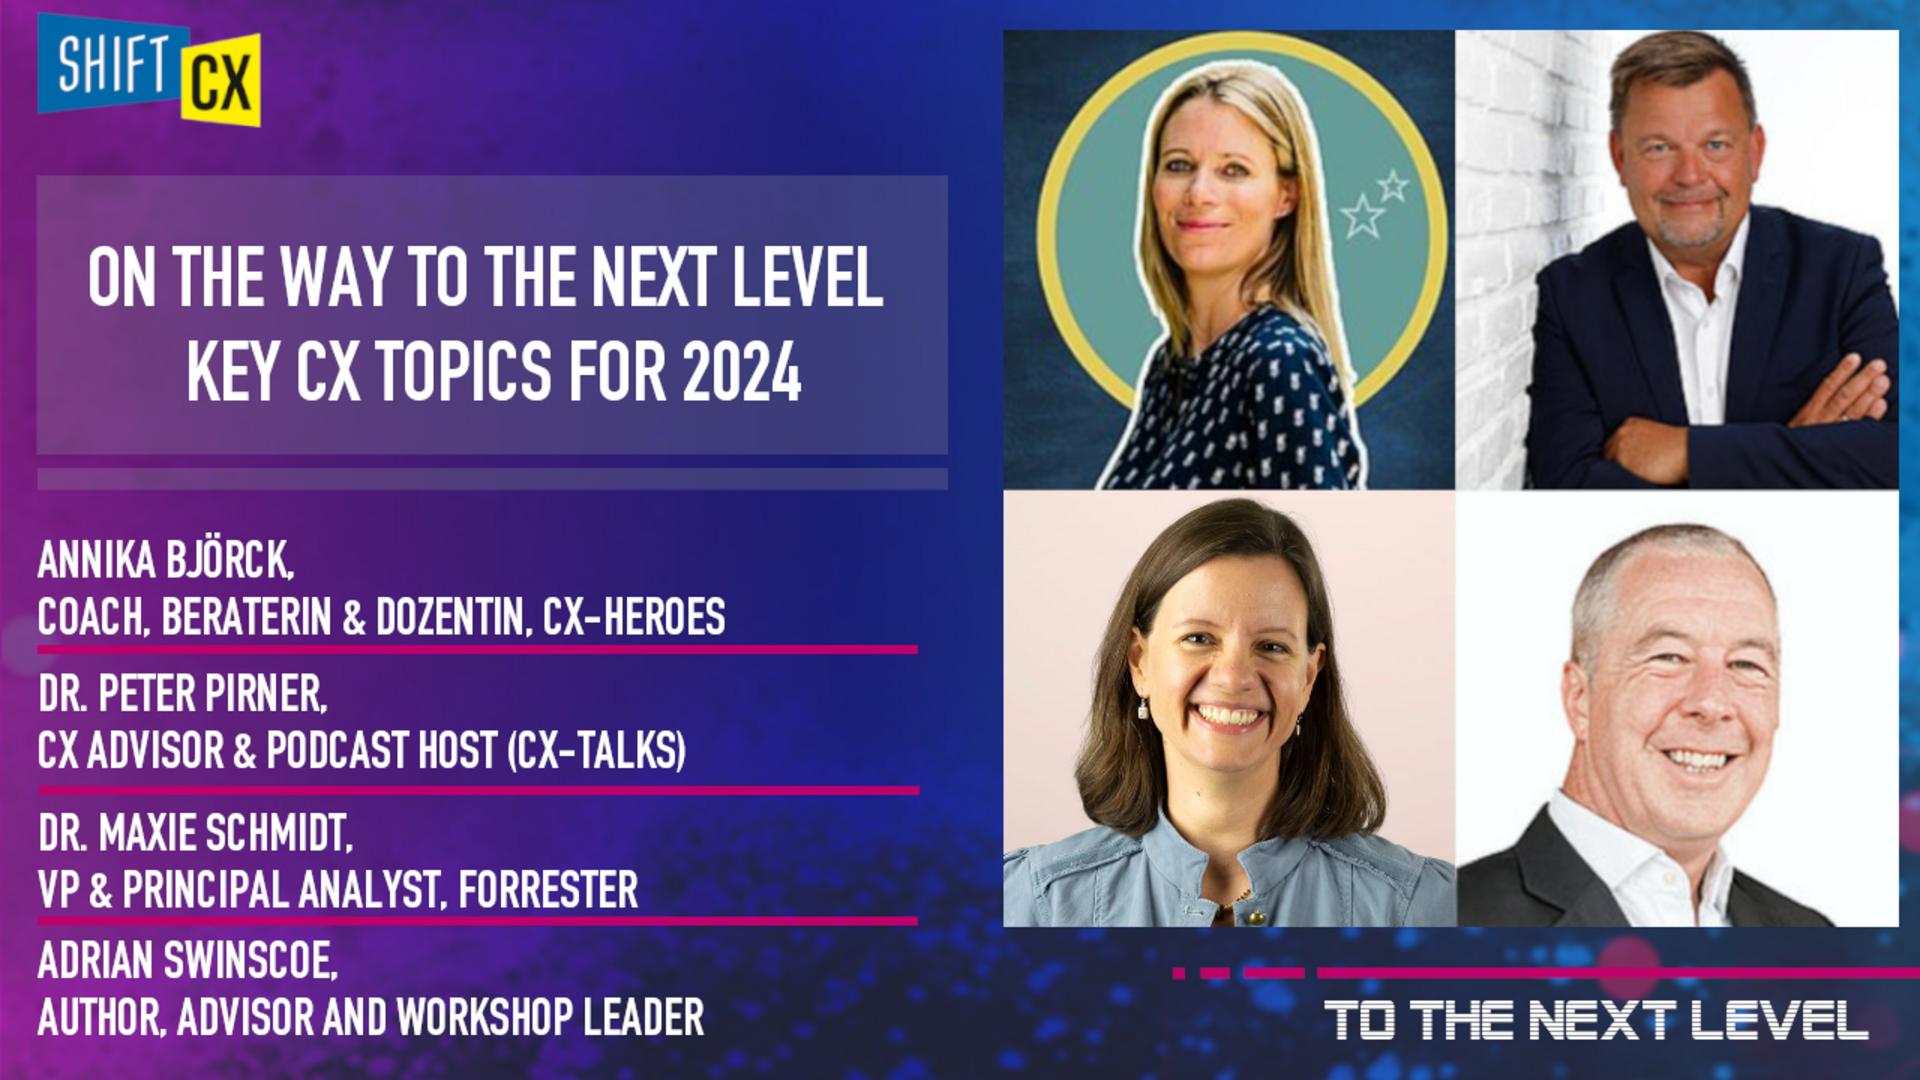 On the Way to the Next Level - What are the Key CX Topics To Address in 2024?